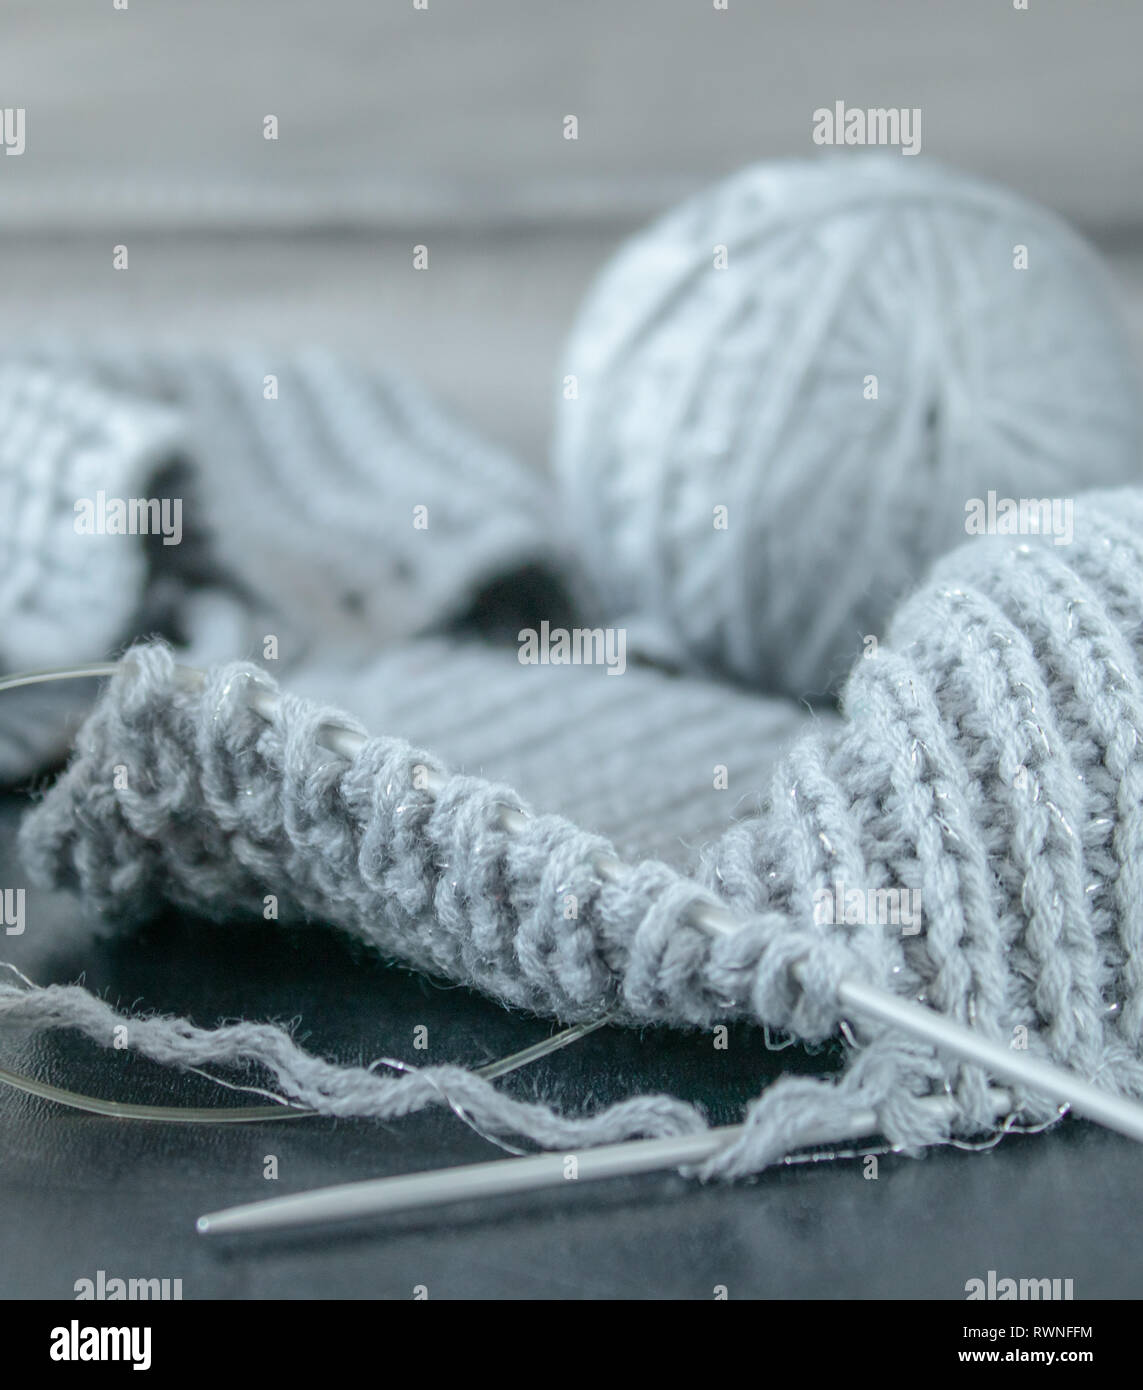 Knitted products on a black background close-up. Stock Photo